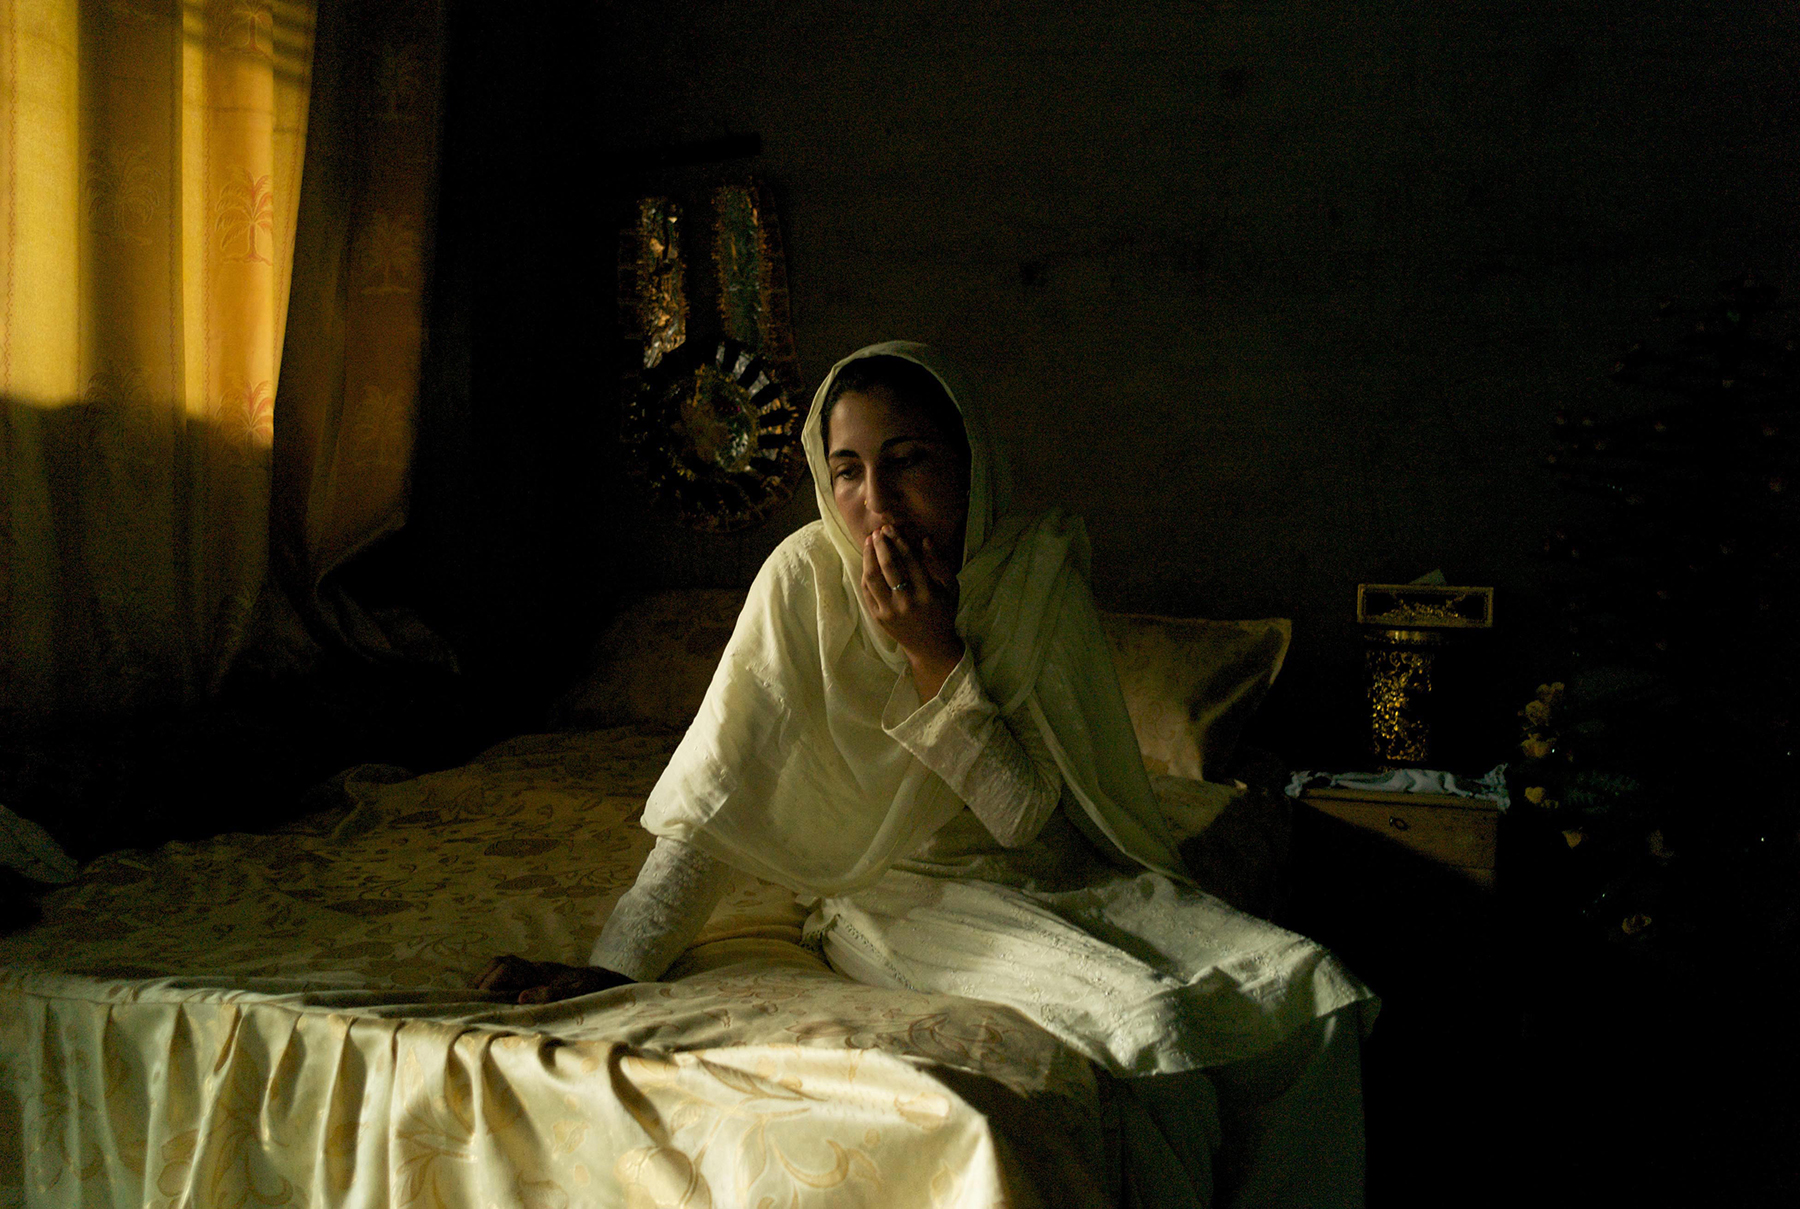  CHARBAGH, PAKISTAN- AUGUST 2009 
Twenty-eight year old mother of six Taslim sits in a state of depression on her marital bed following the beheading of her husband by the Taliban. Taslim's husband Sher Ahmed was returning home for the weekend after 